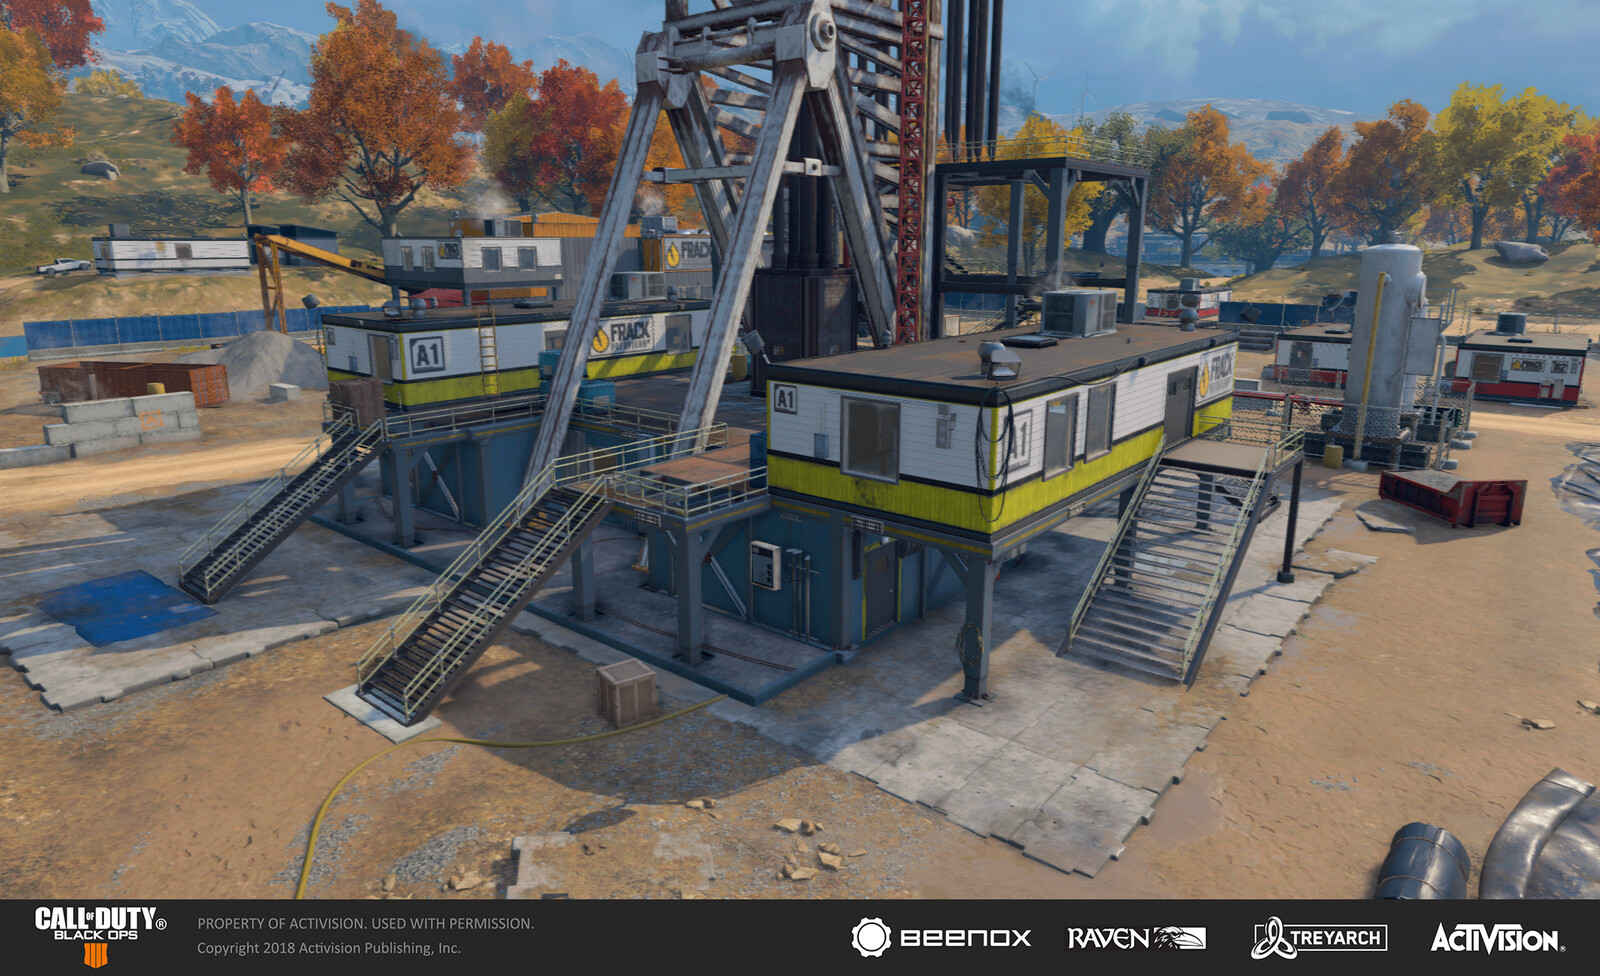 Overview of the main fracking rig in Blackout Mode. I worked on metallic beamwork and surface treatment of the platforms by configuring existing materials /models. I also bolstered the tall ladder by configuring a variety of existing models and textures.